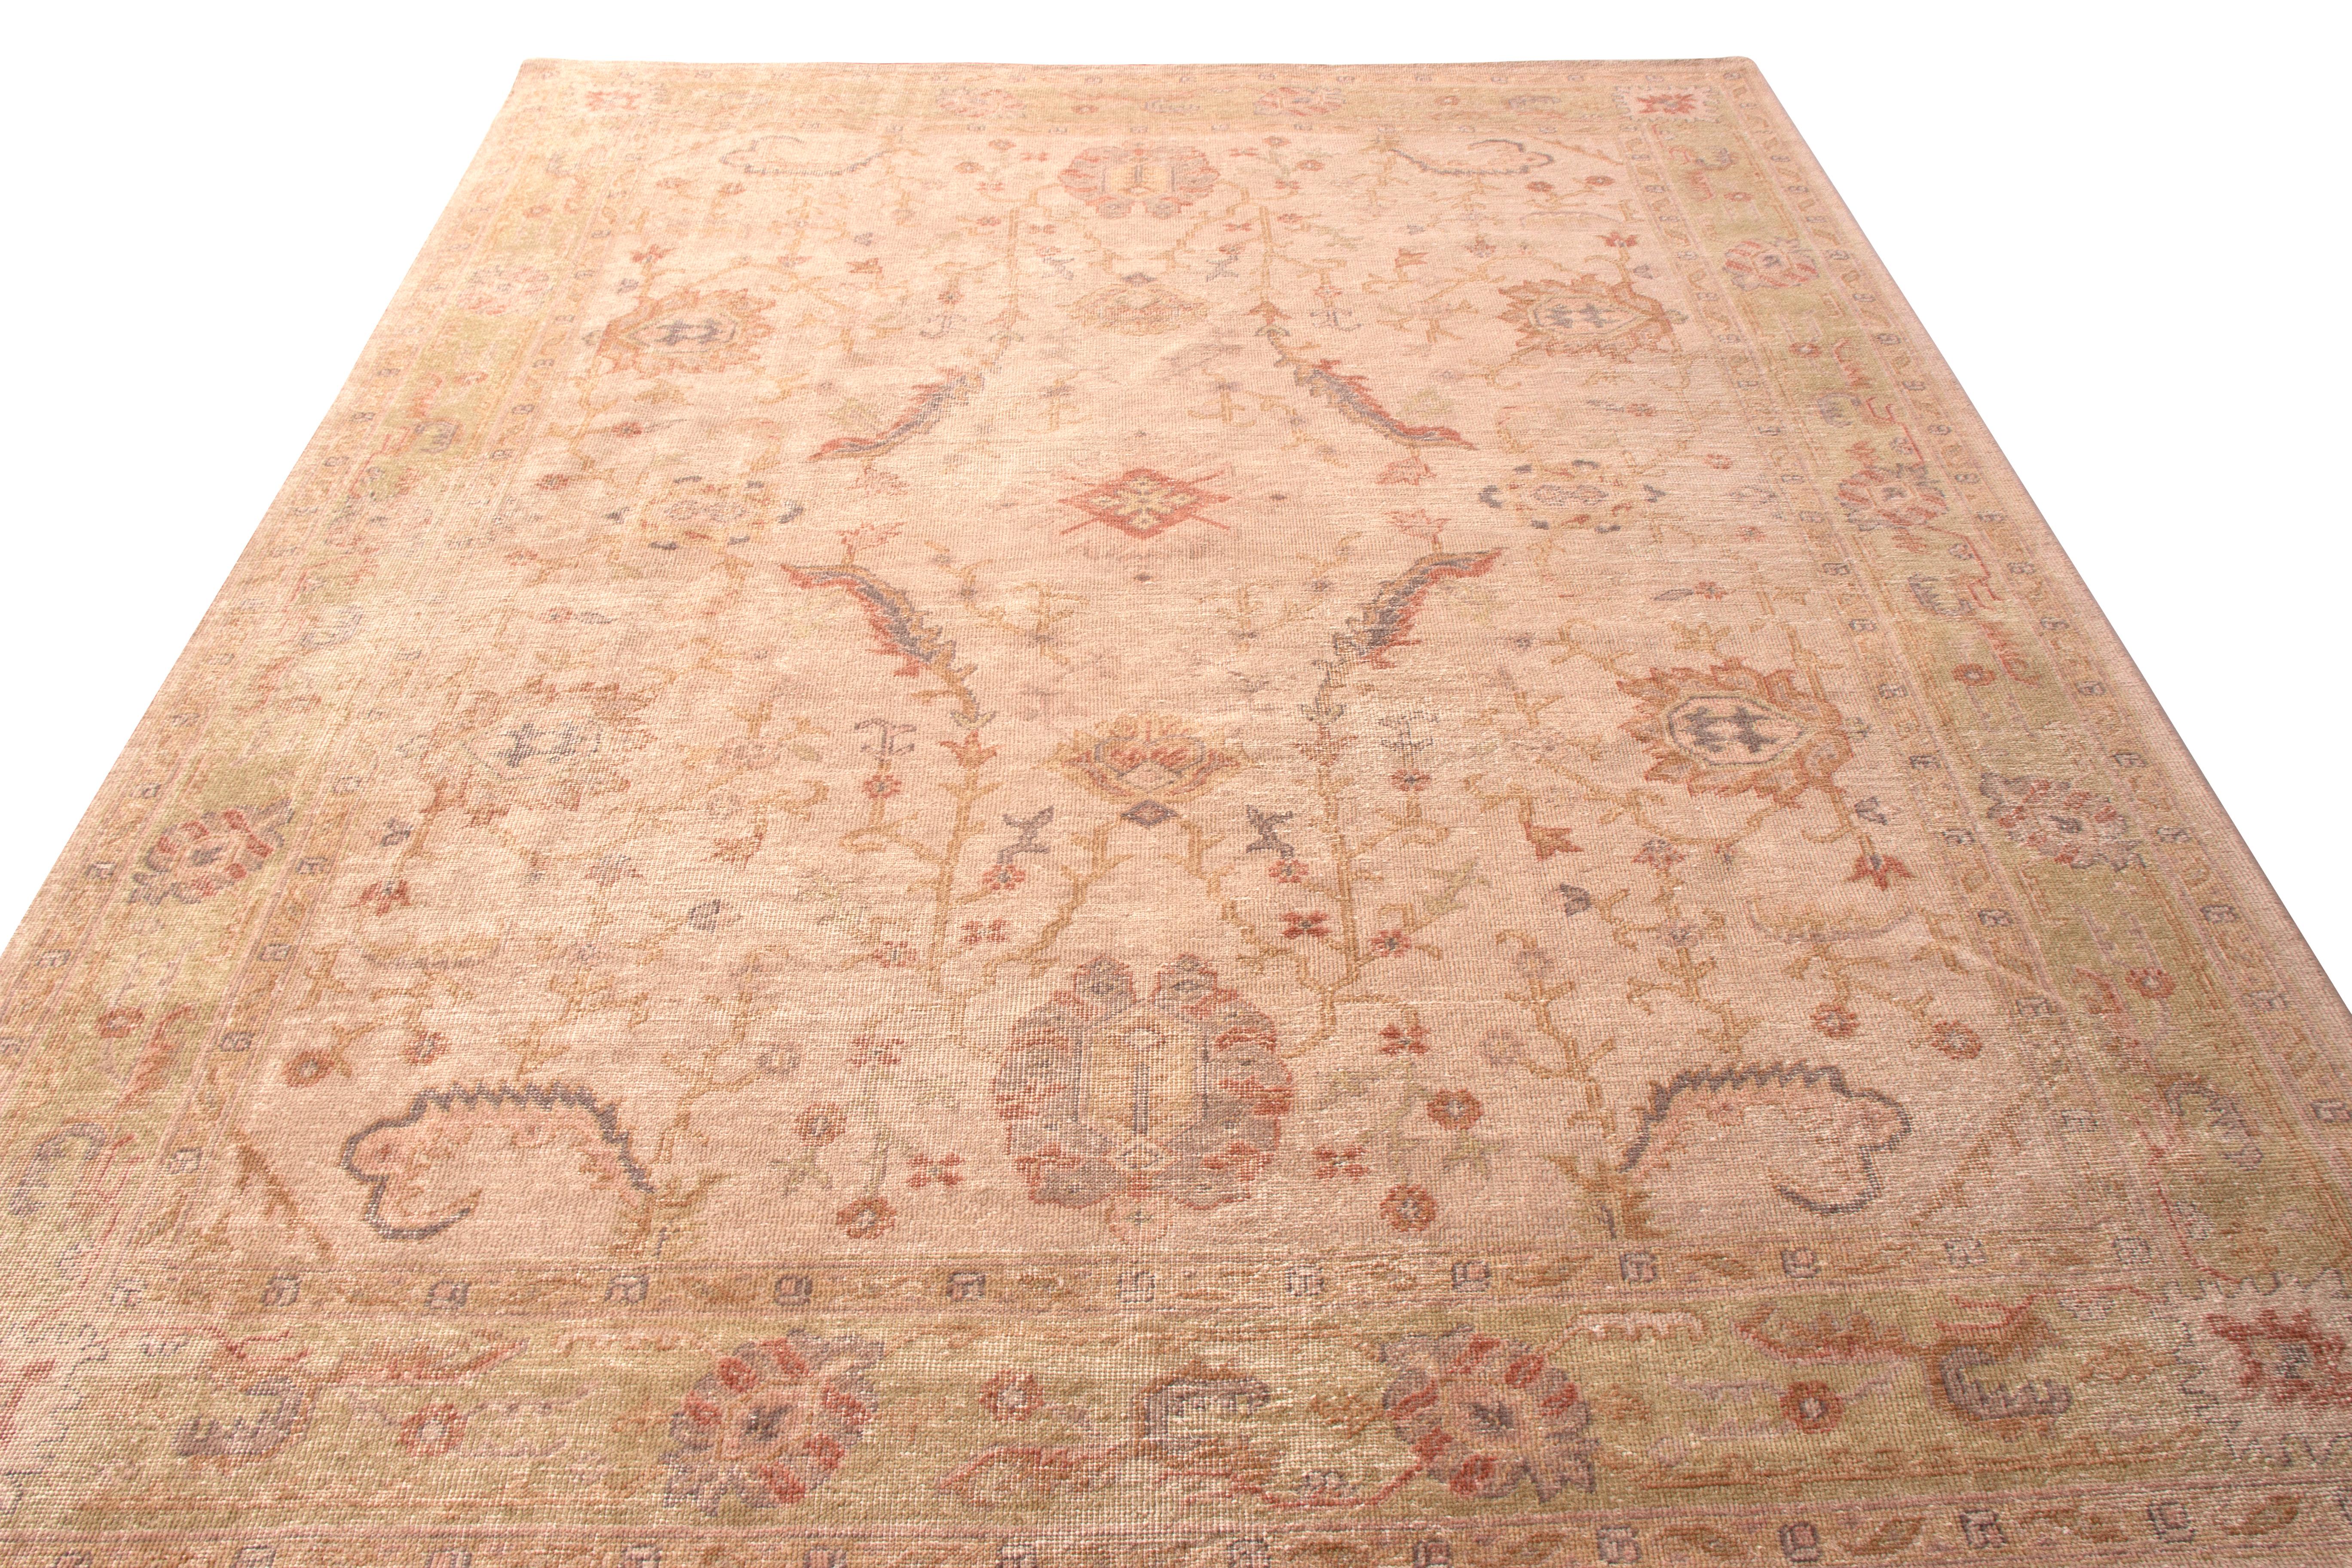 Rustic Hand Knotted Distressed Floral Rug Beige Pink Classic Pattern by Rug & Kilim For Sale